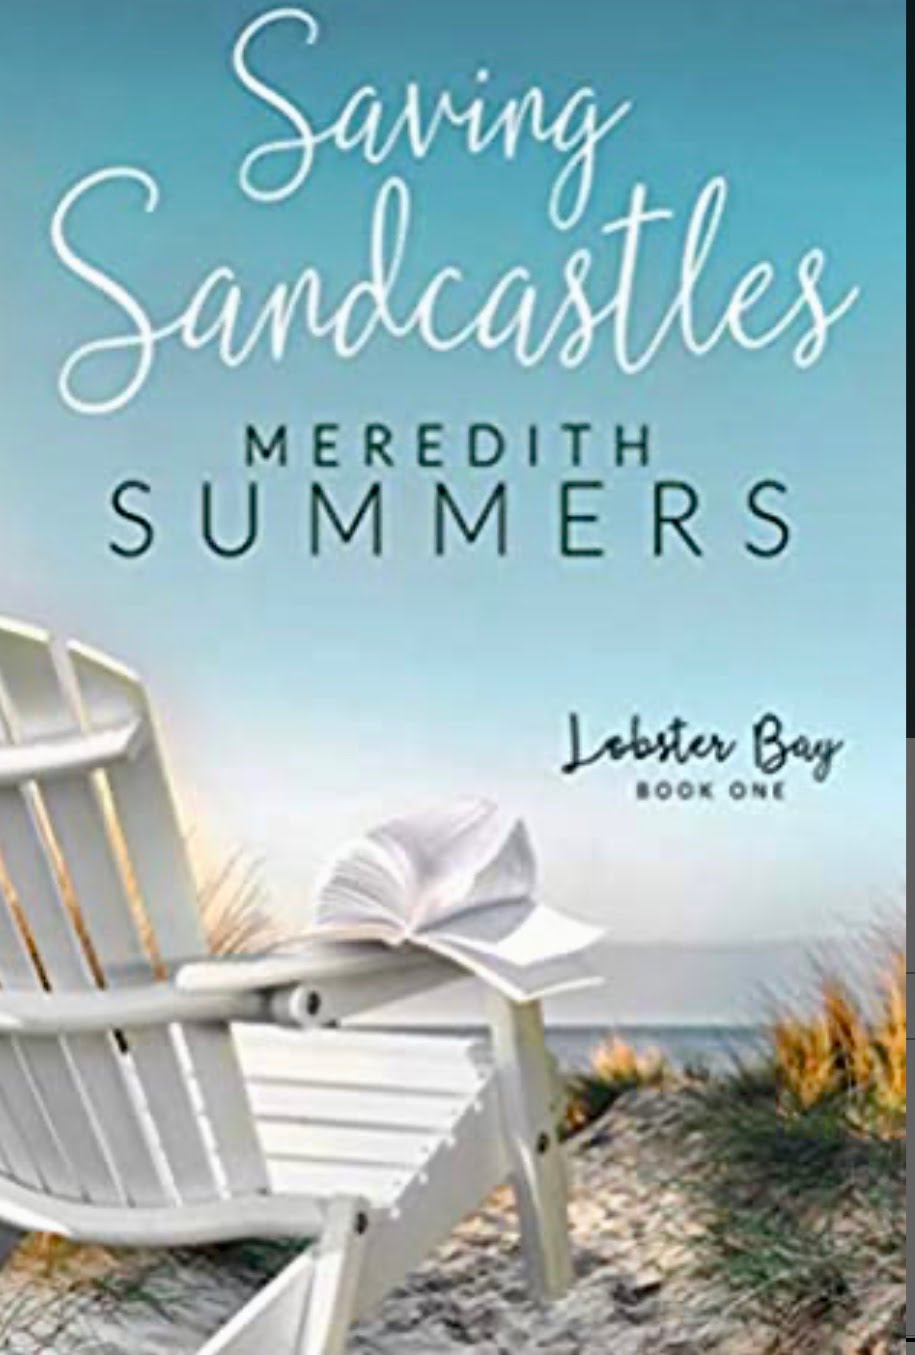 SAVING SANDCASTLES BY MEREDITH SUMMERS – BOOK REVIEW